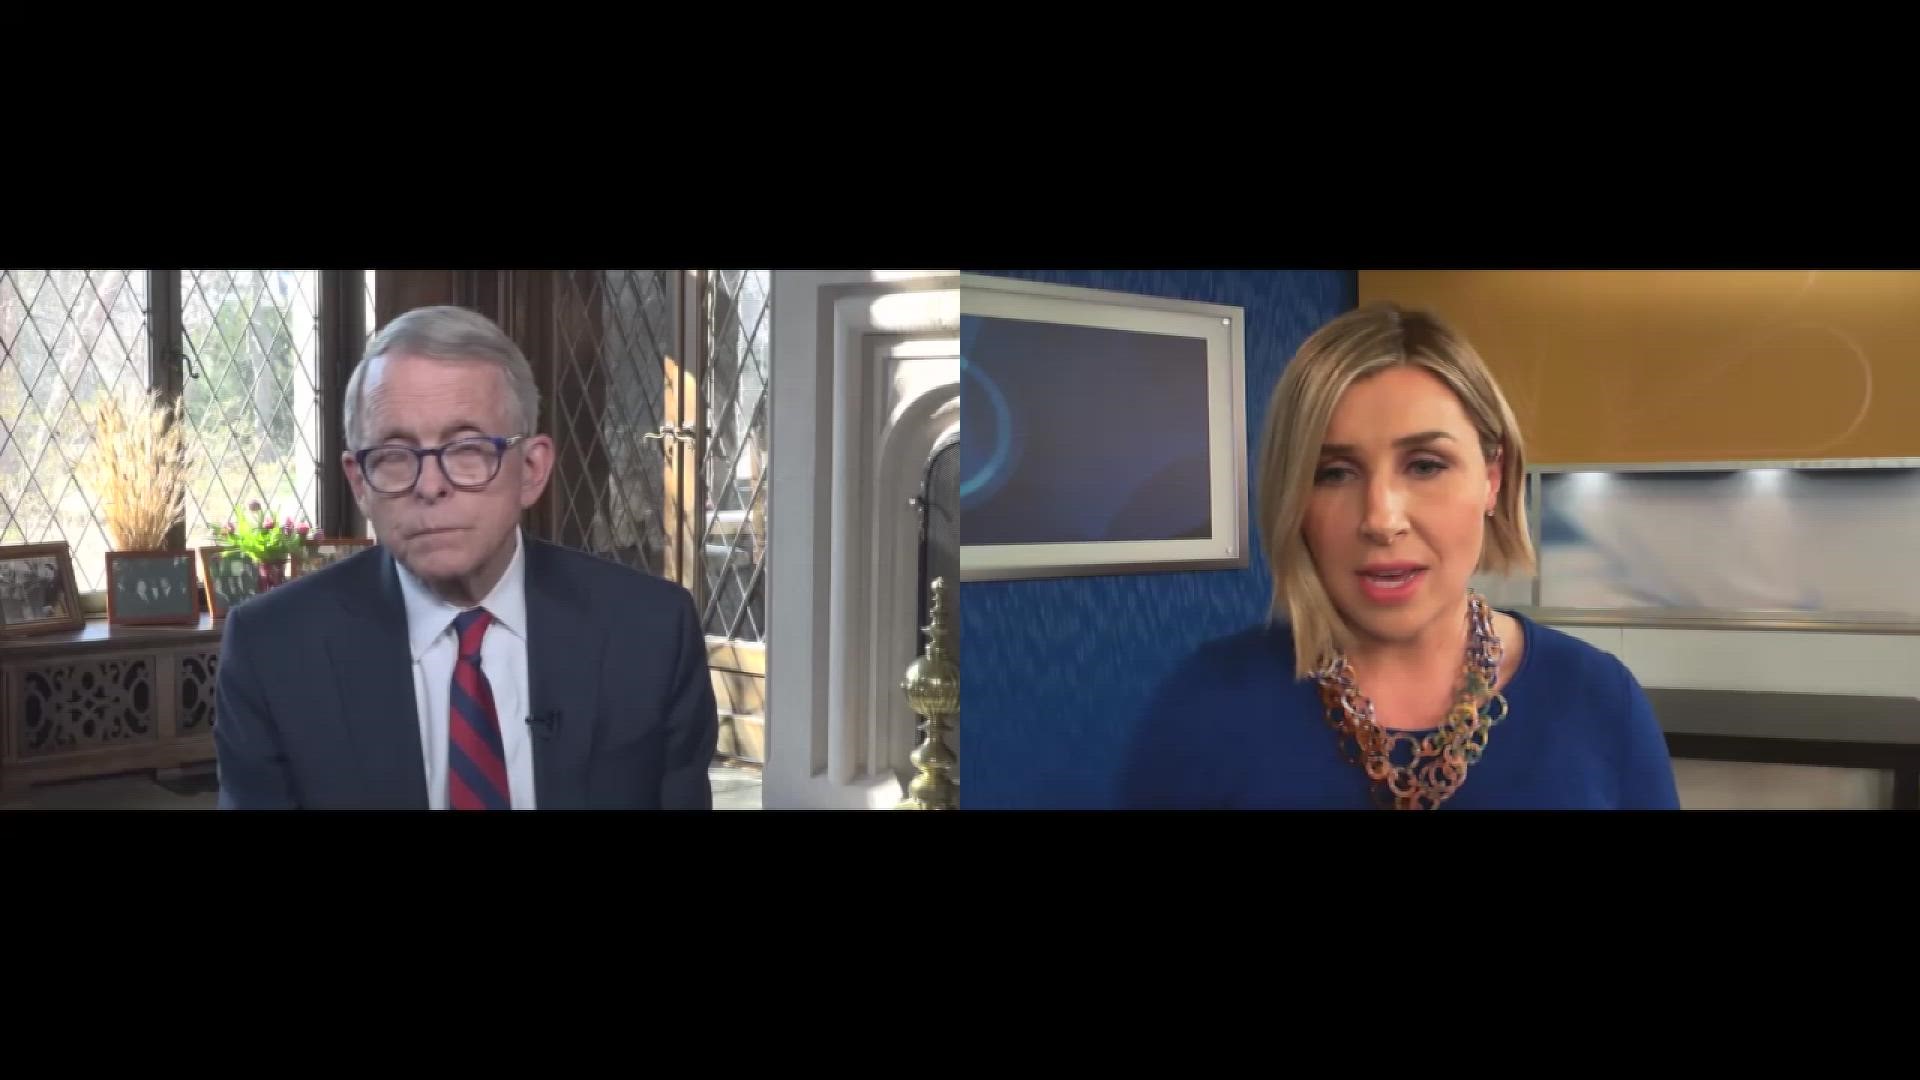 On March 9, 2020, DeWine reported Ohio's first cases of COVID. Two years later, he reflected on the pandemic with 3News' Sara Shookman.